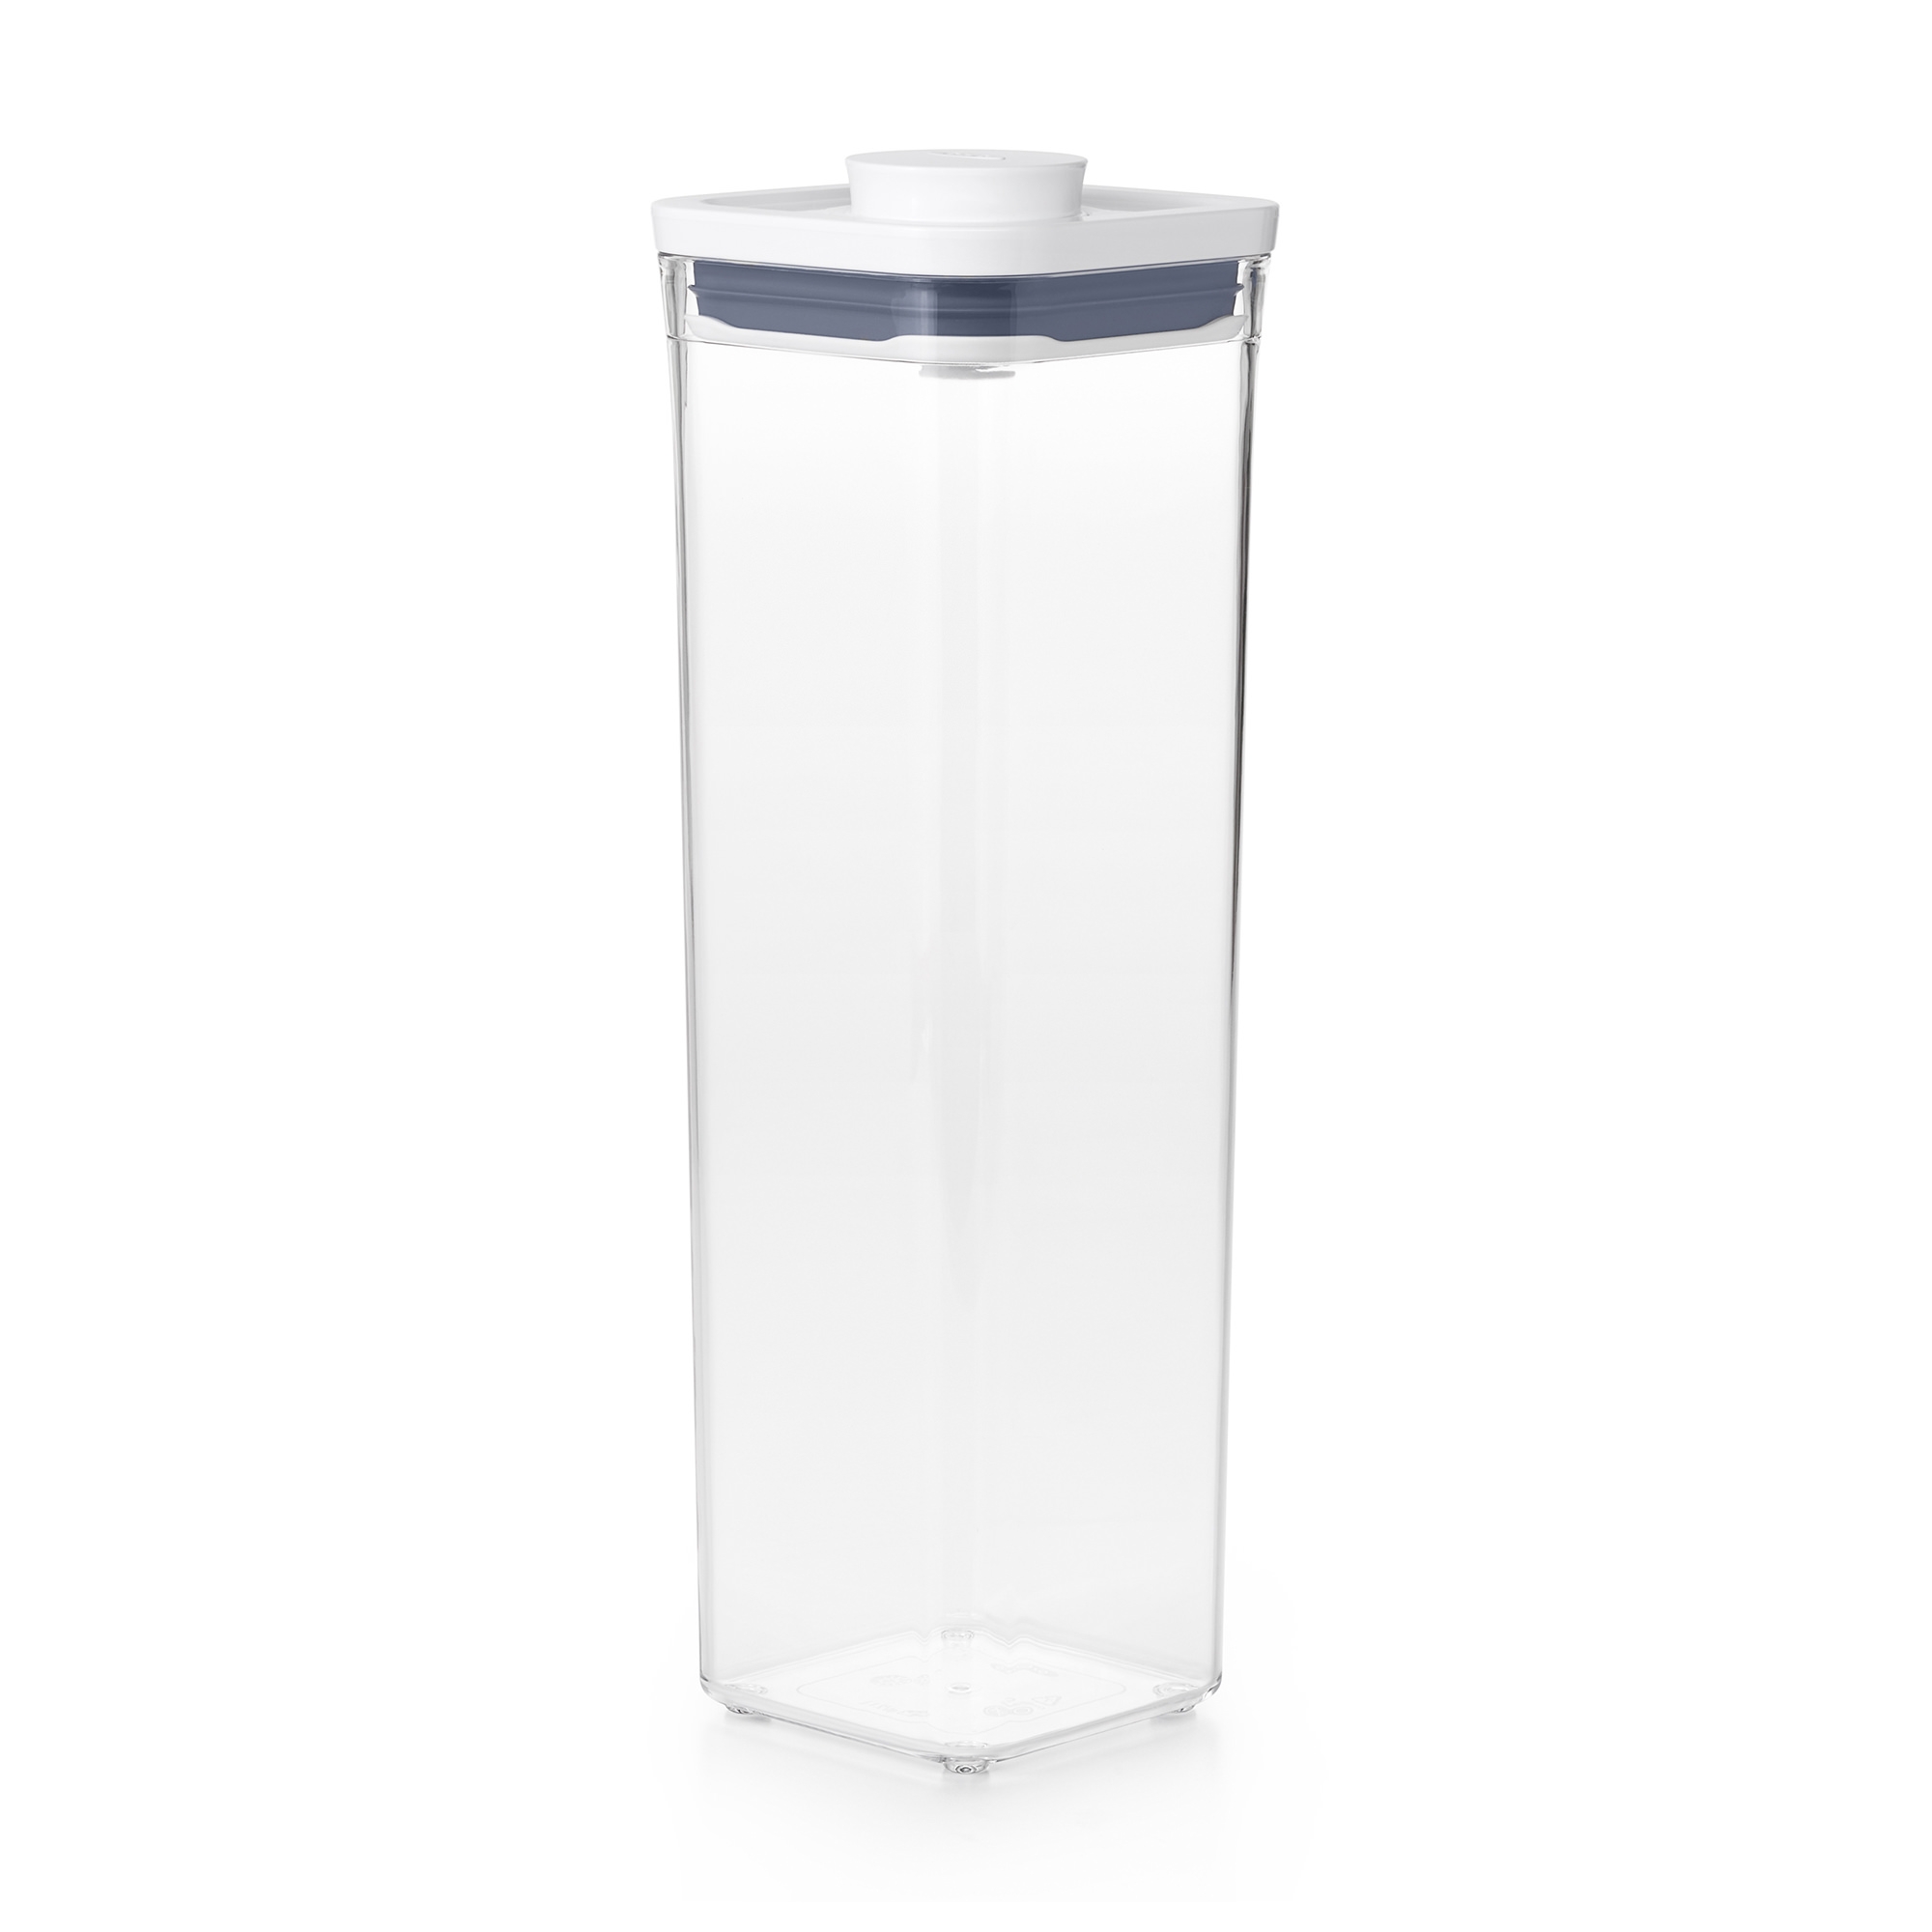 OXO Good Grips Square Pop 2.0 Container 2.1L Image 2